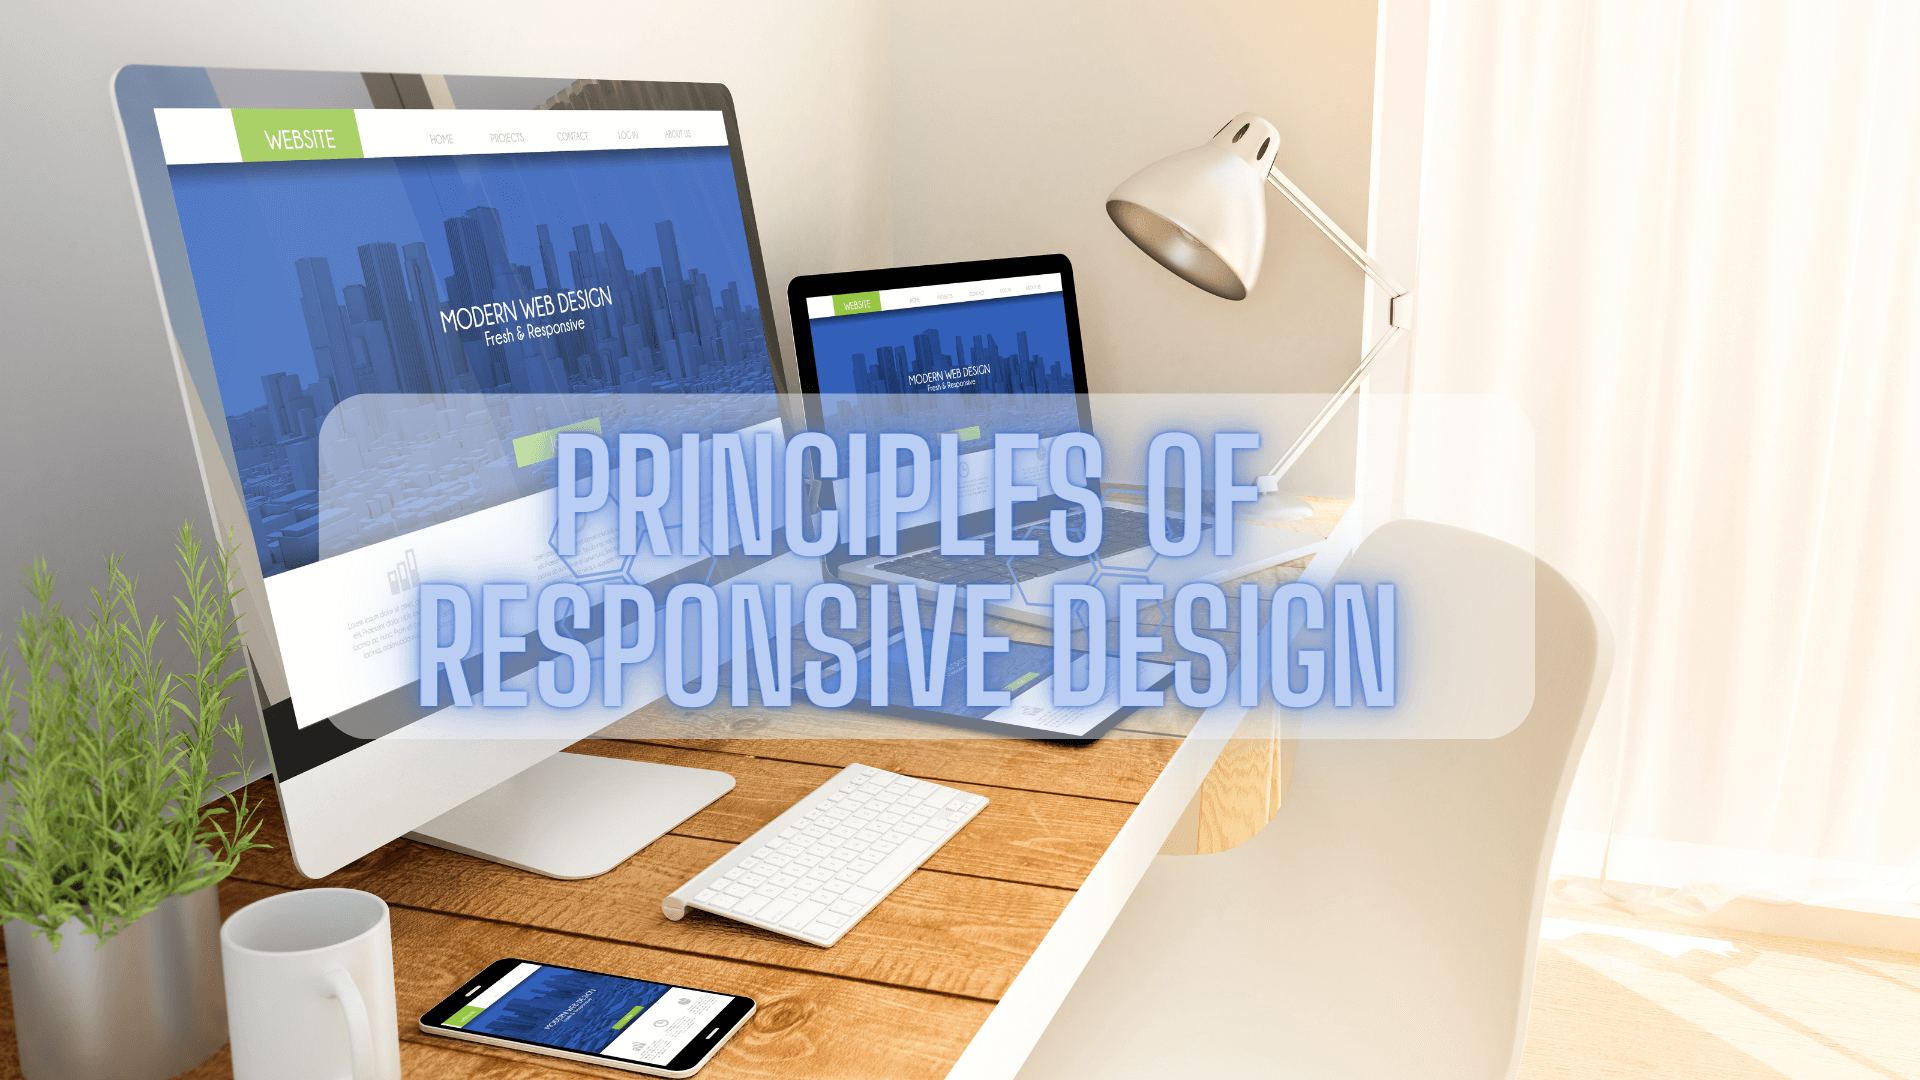 The Timeless Principles of Responsive Design